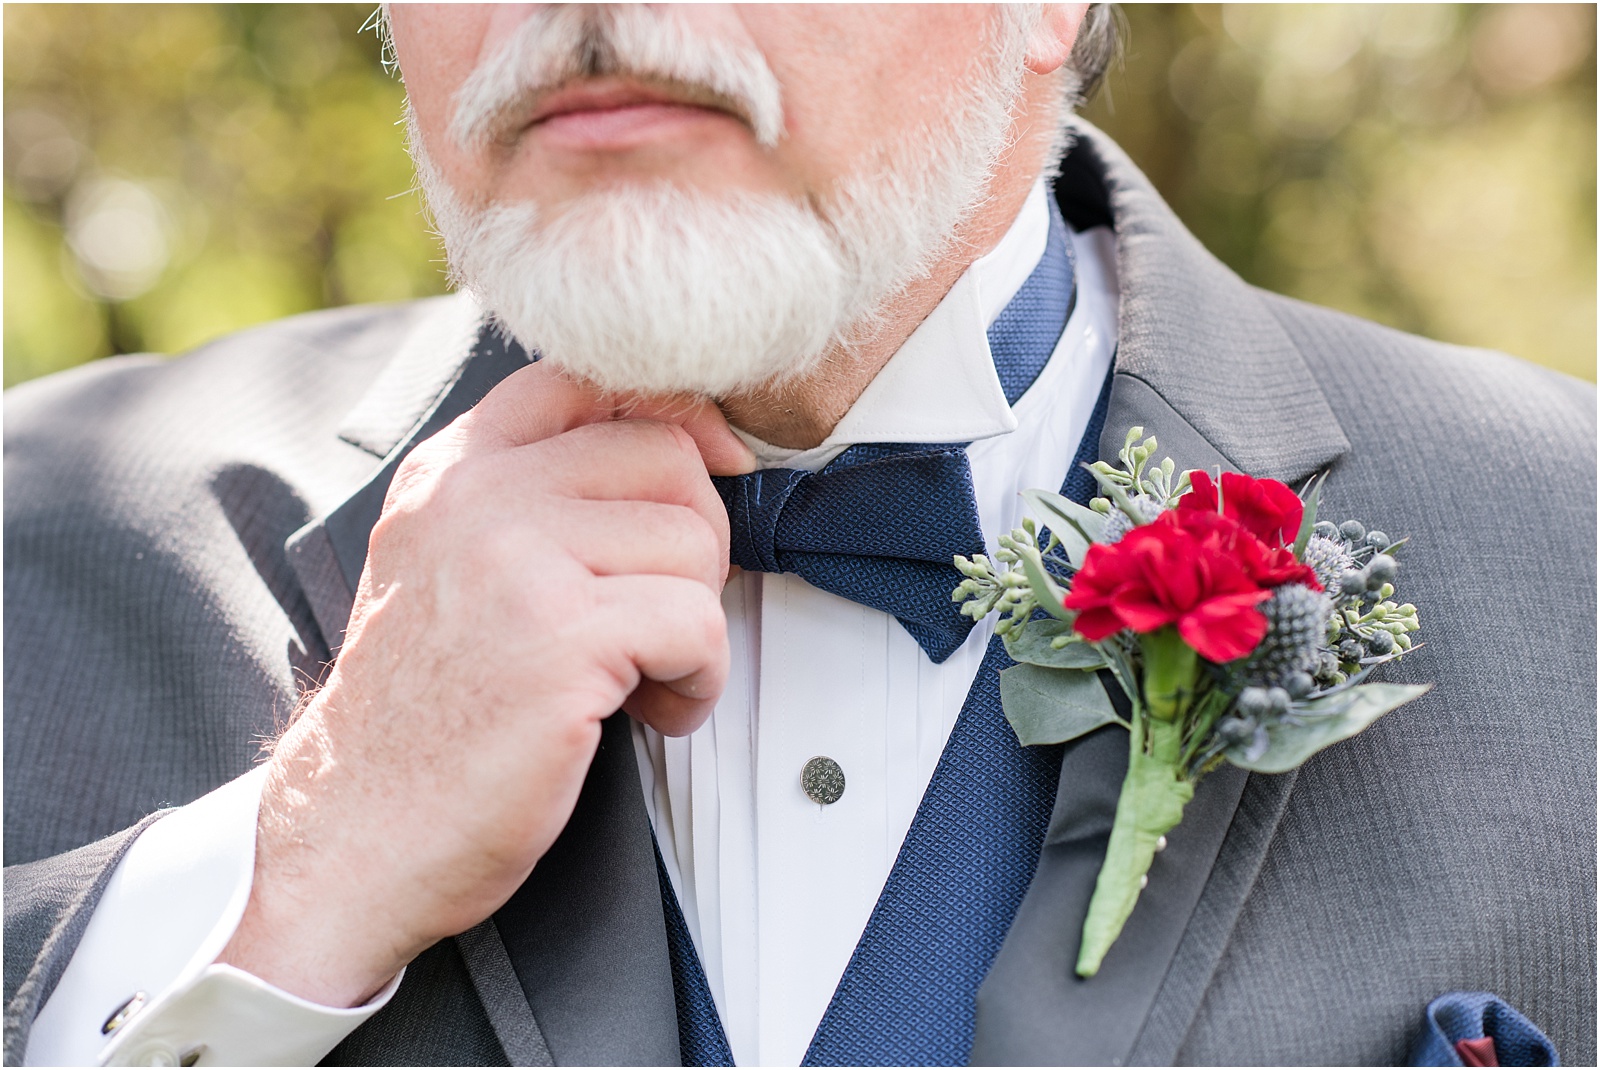 Michelle and Sara Photography, Michelle and Sara weddings, michelle robinson photography, burke manor inn, groom details, boutonniere, floral details for groom, red florals, fall boutonniere, navy and grey suit